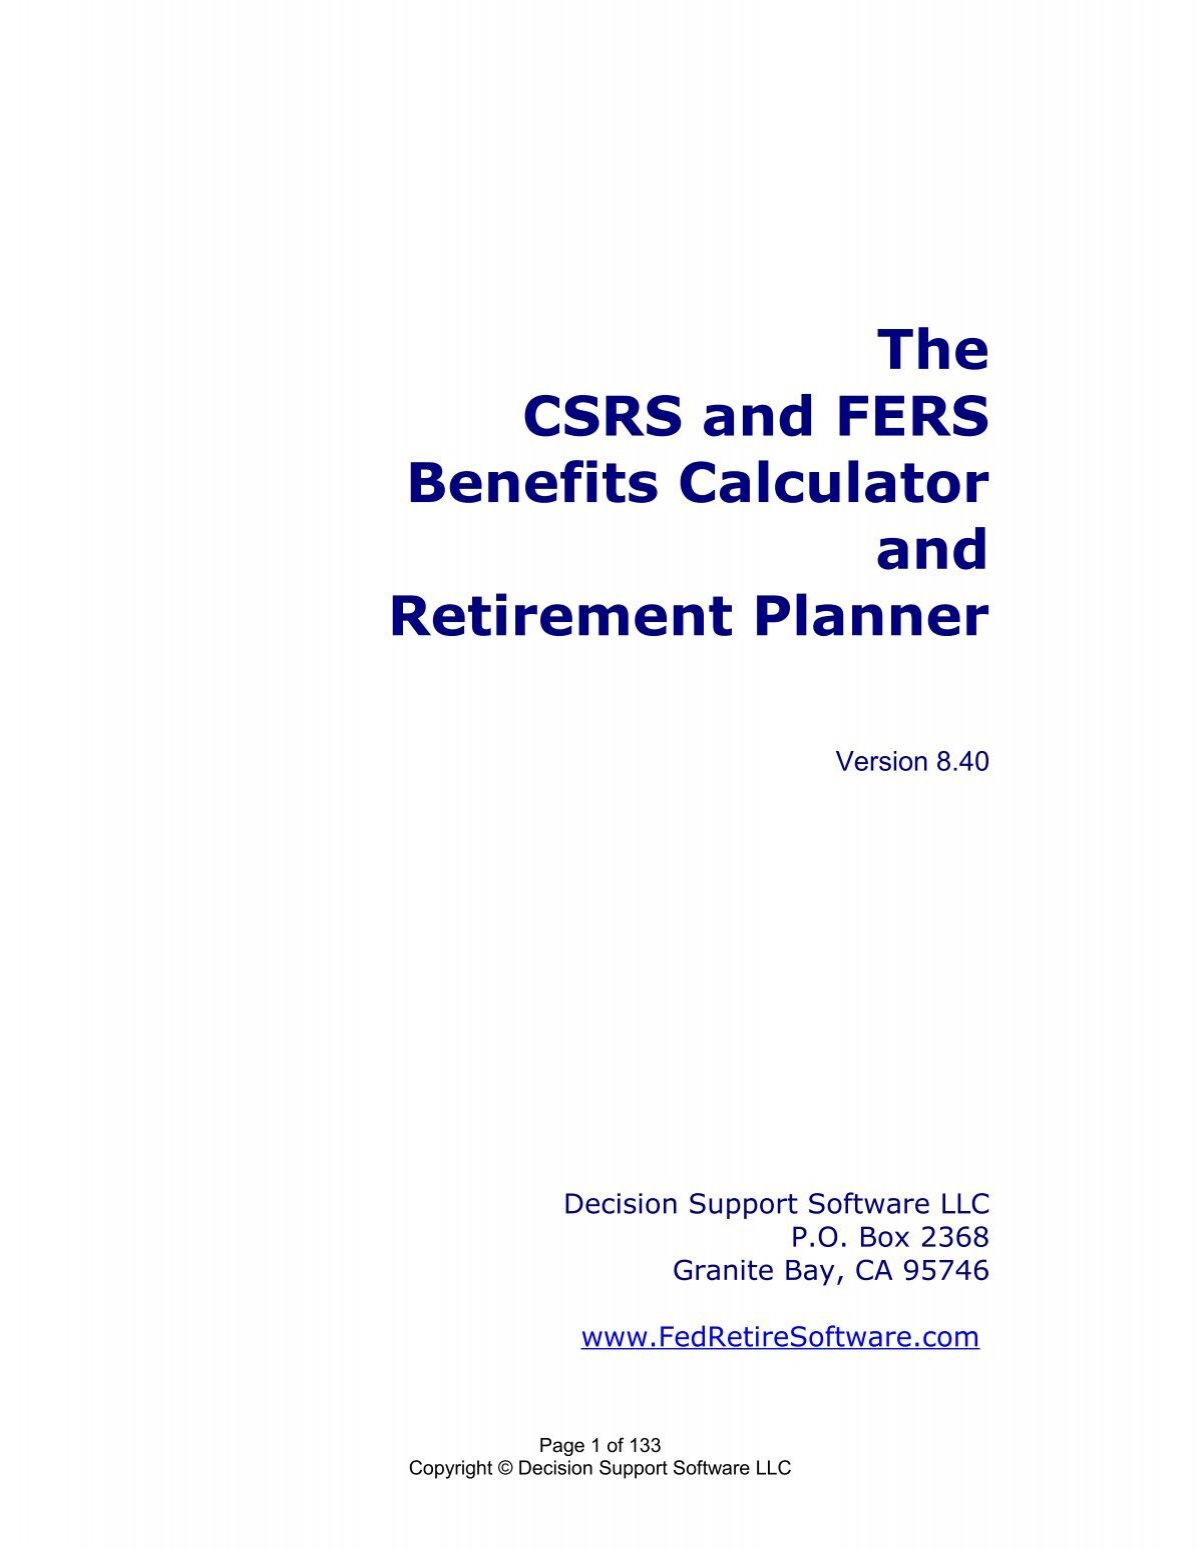 Projected Annuity Calculator / CSRS & FERS